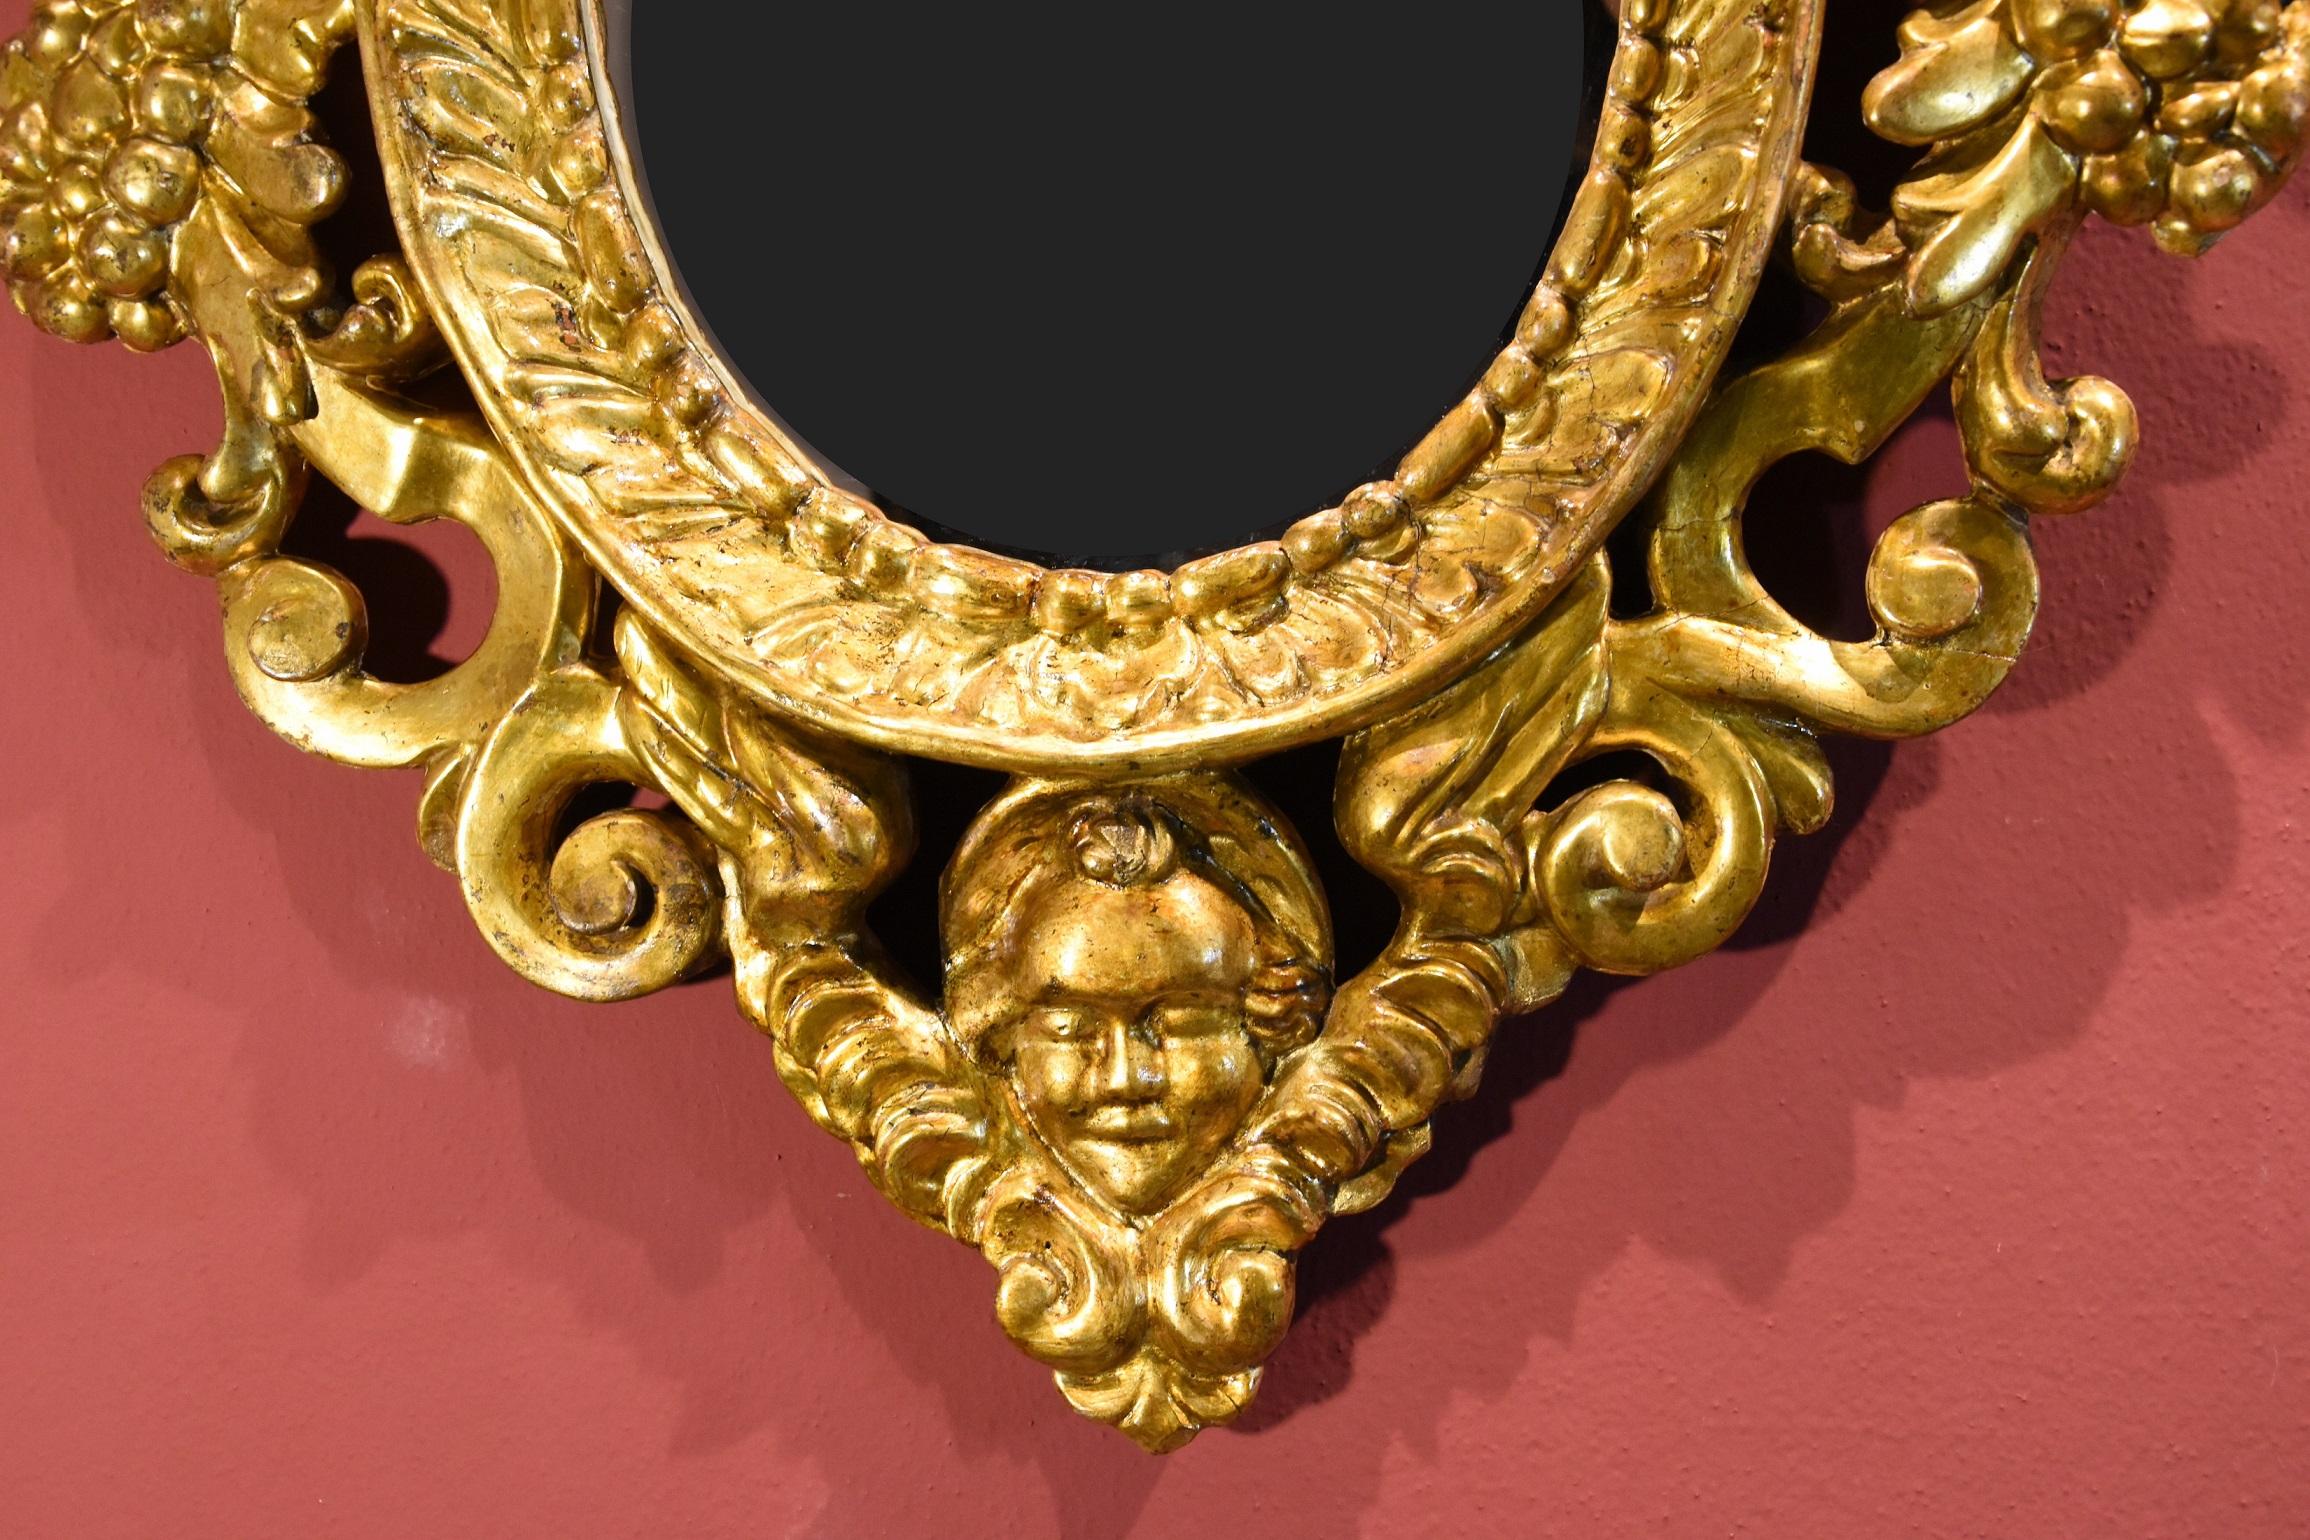 Pair Carved Gilded Mirrors Gold Wood Venice 18th Century Italy Quality Baroque For Sale 8